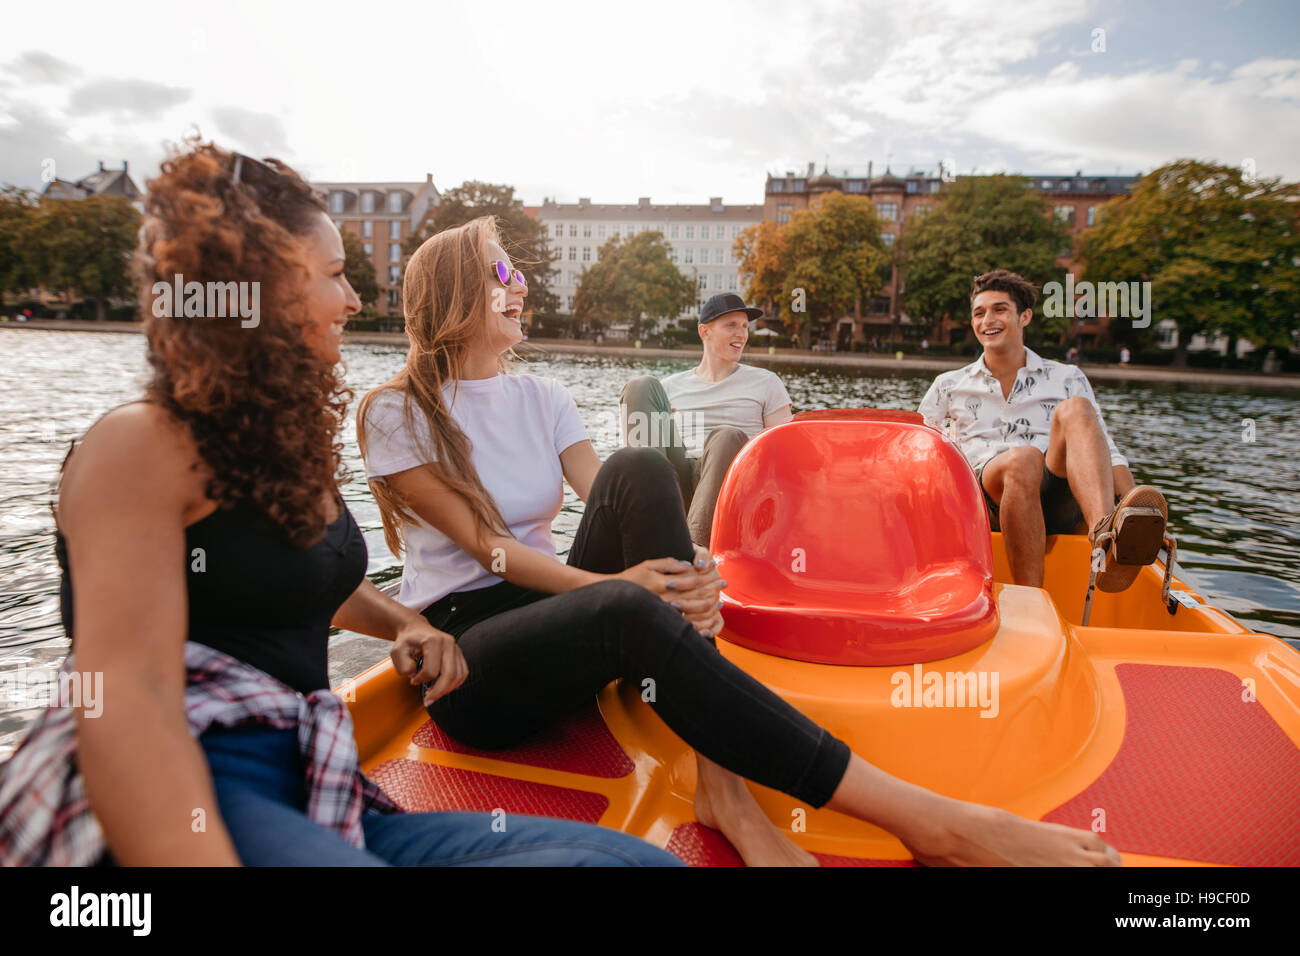 Shot of group of young people sitting on pedal boat in lake. Teenage friends enjoying on pedal boat in lake. Stock Photo